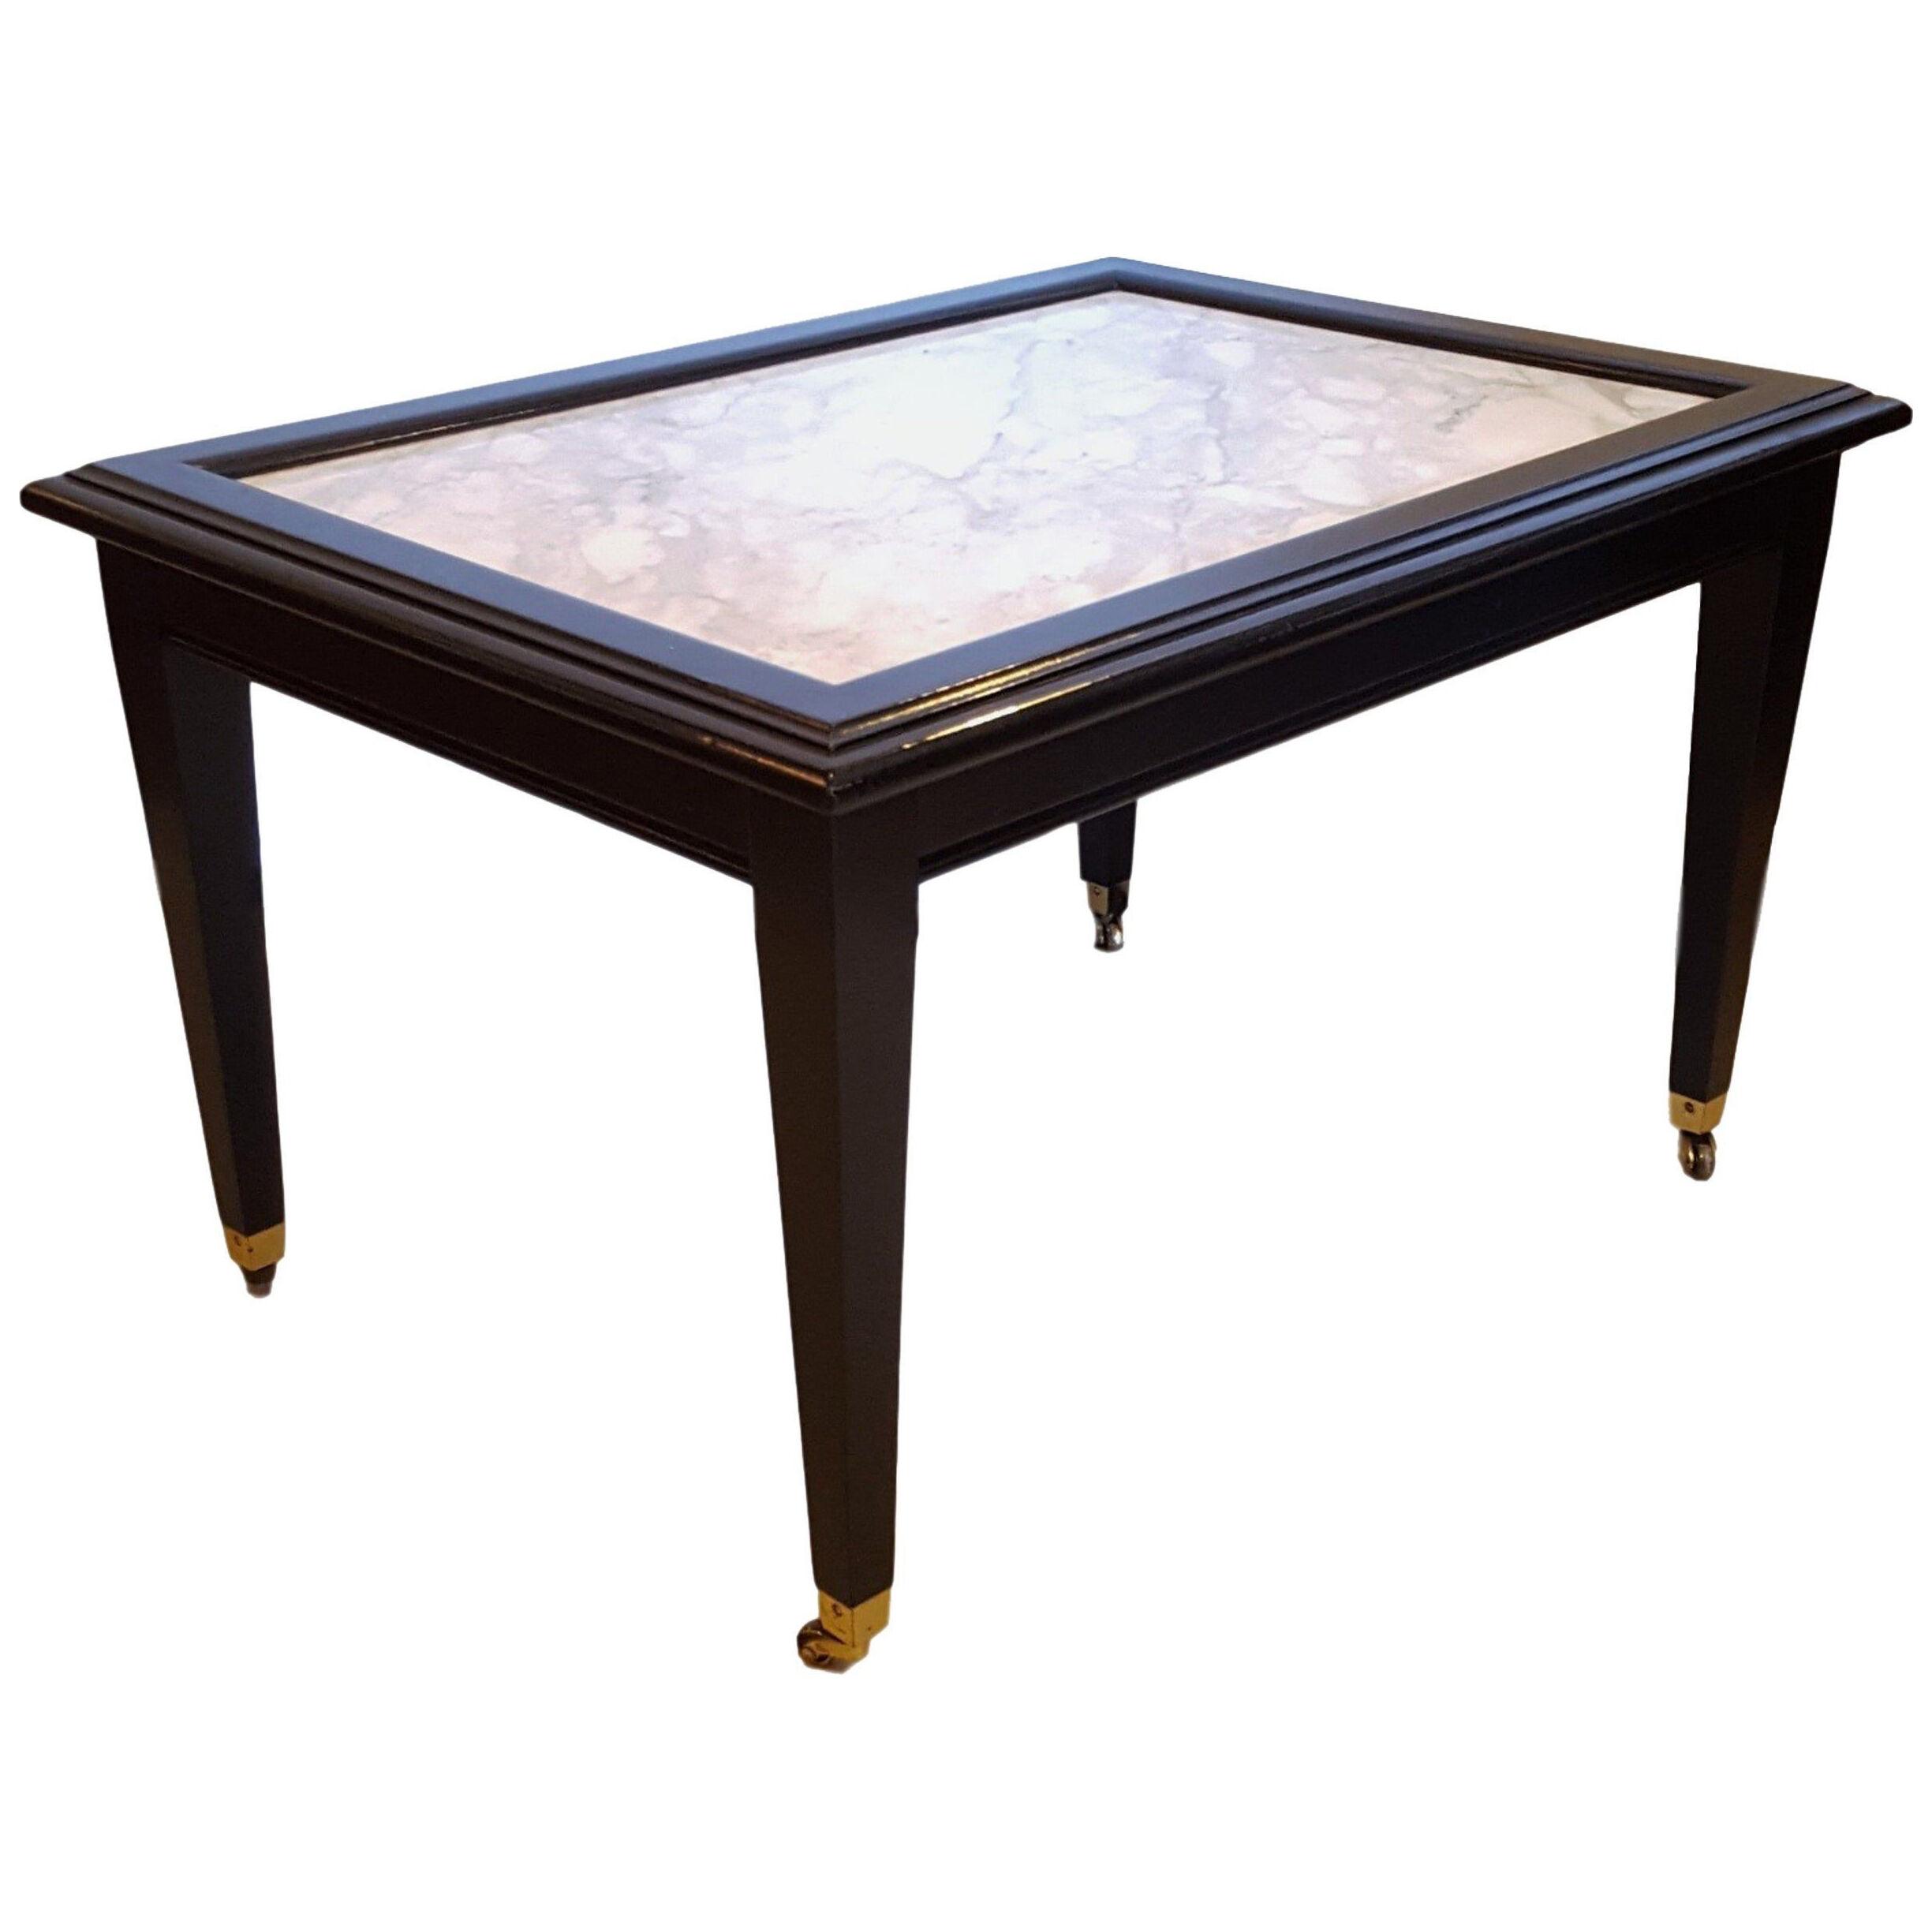 Ebonized Marble Top Coffee Table / Cocktail Table On Wheels manner of Jansen